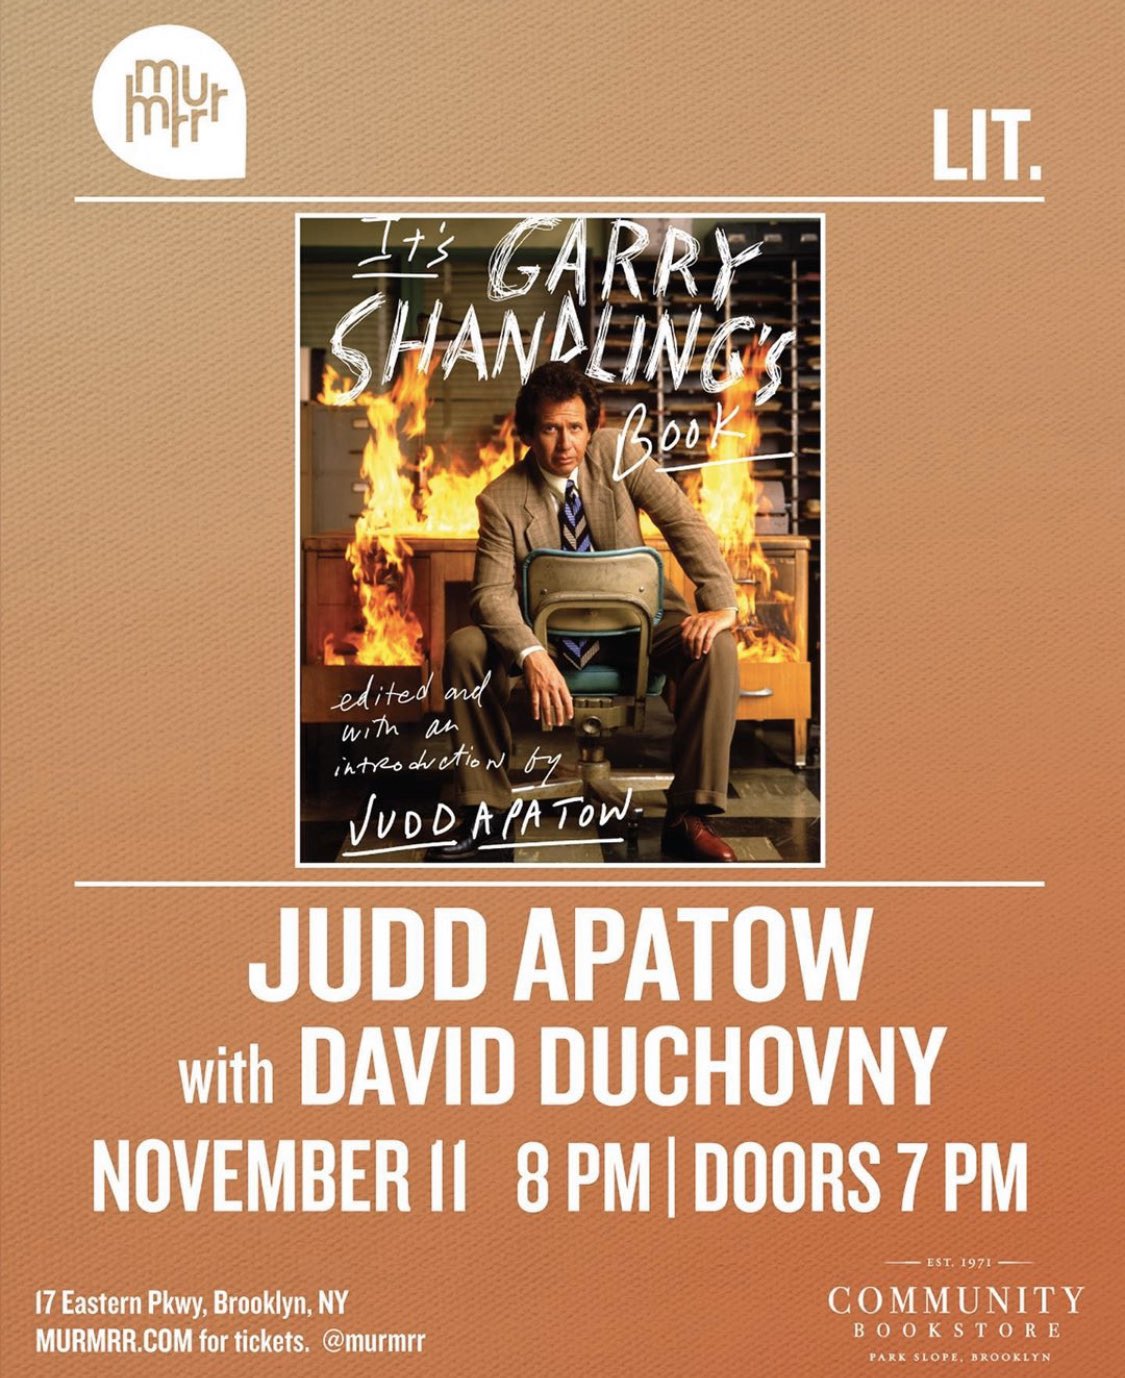 2019/11/11 - Judd Apatow with David Duchovny EH7JiQPU4AE2KzS